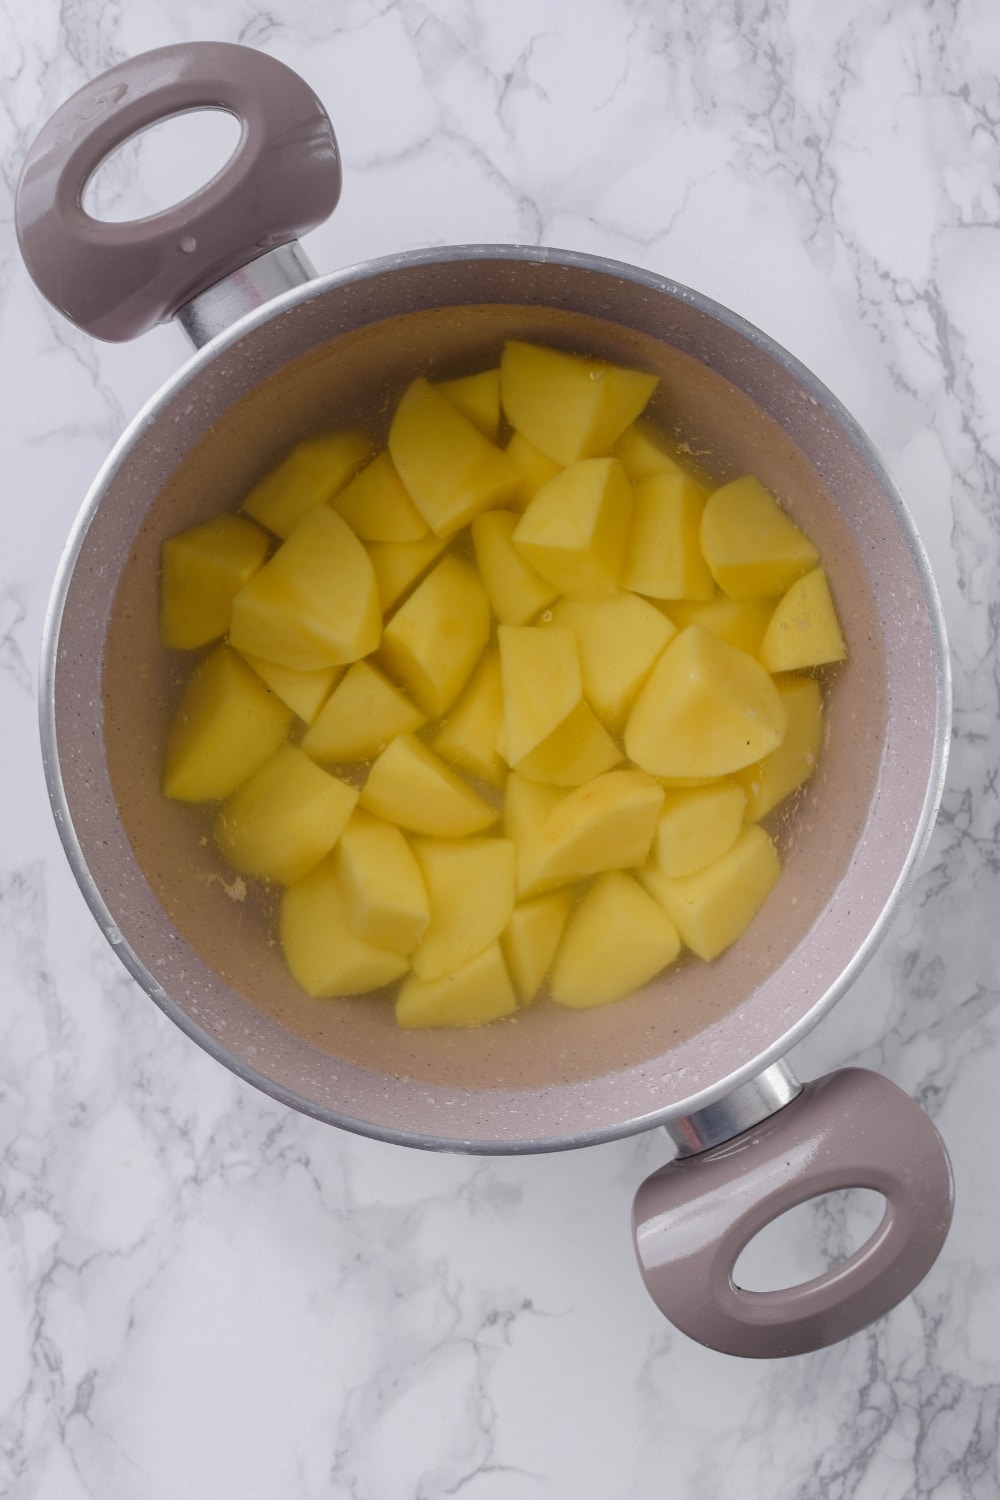 Chopped potatoes soaking in water in a large pot.